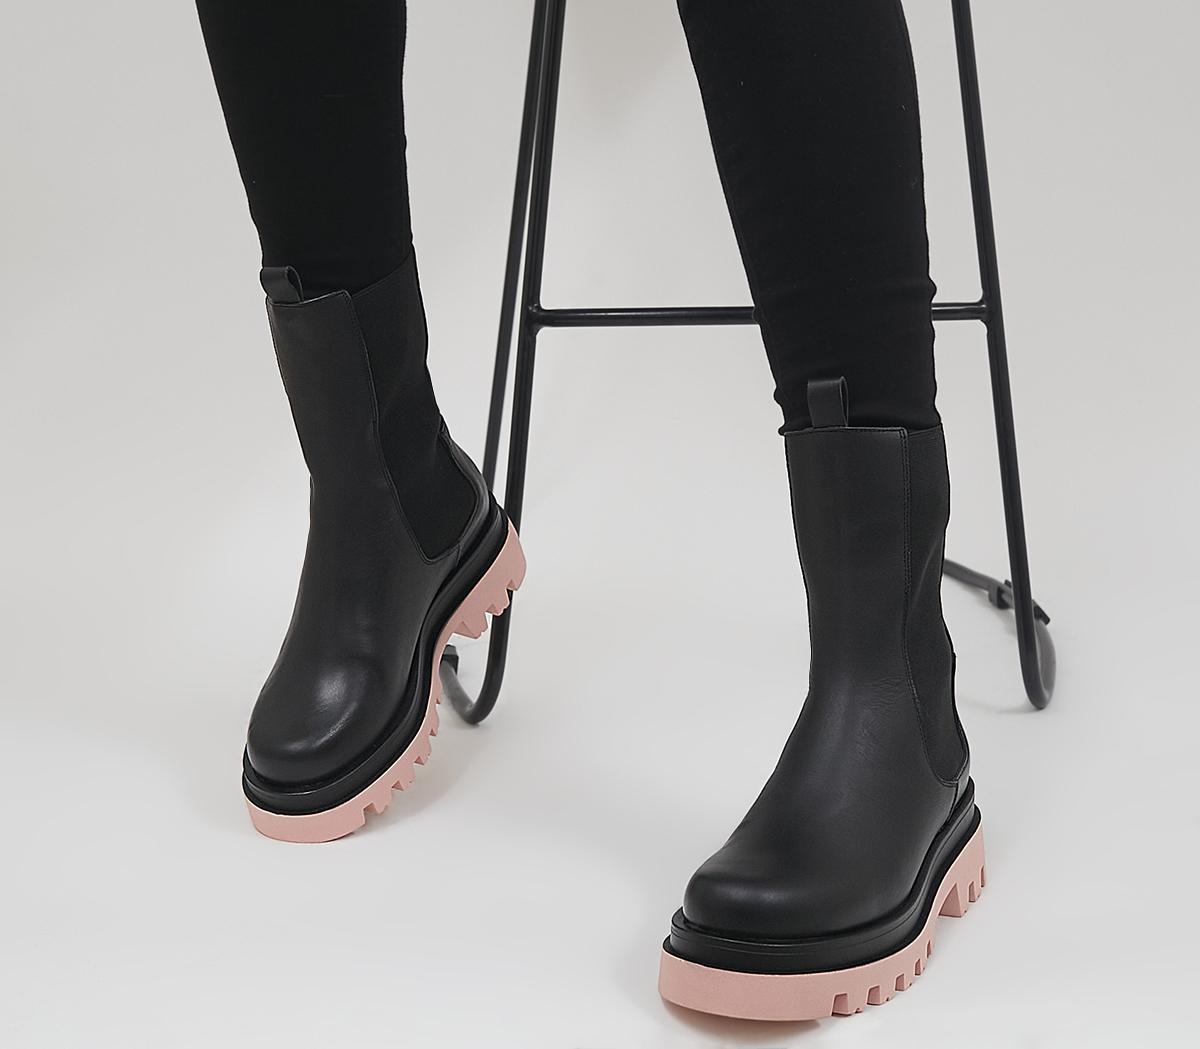 OFFICEAllegra Coloured Sole Chunky Ankle BootsBlack Leather With Pink Sole